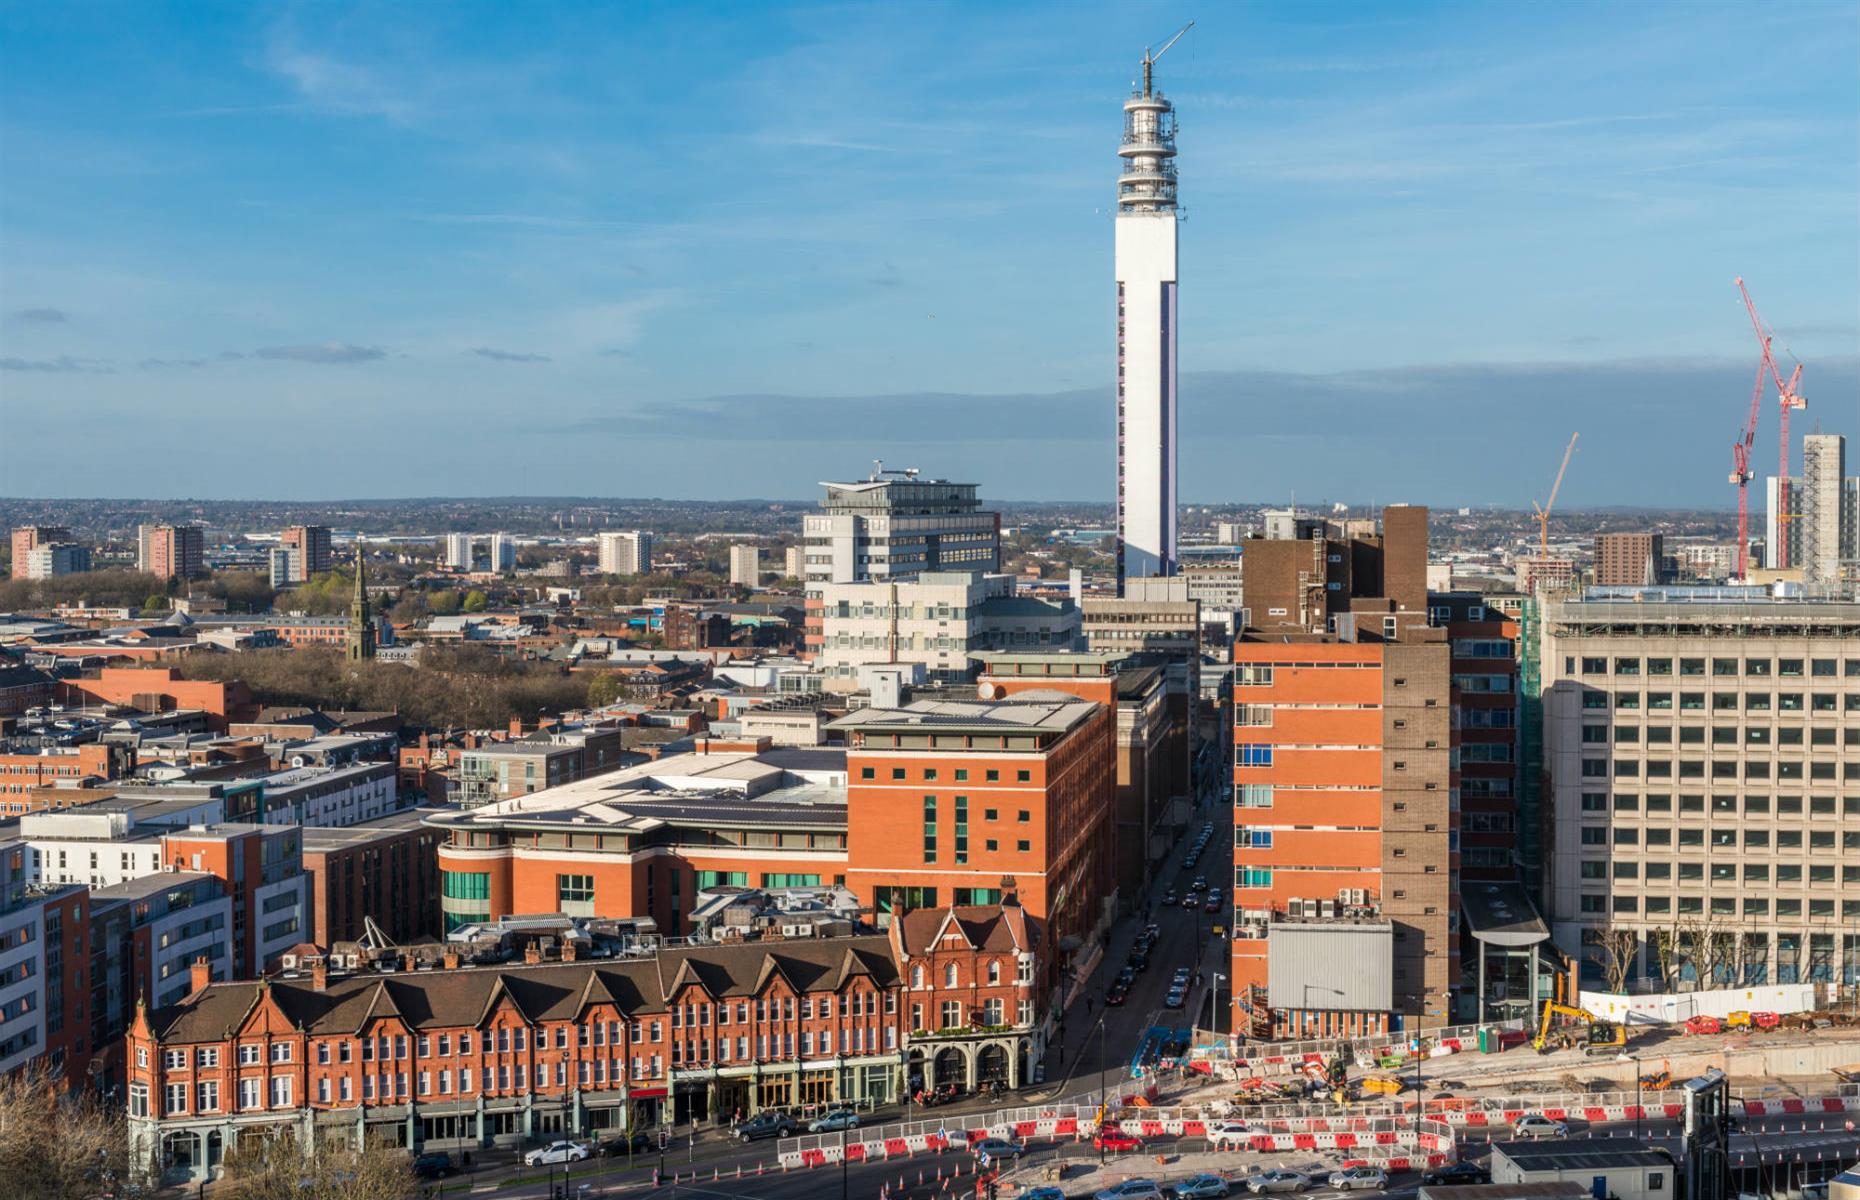 Birmingham and its telecoms tower 